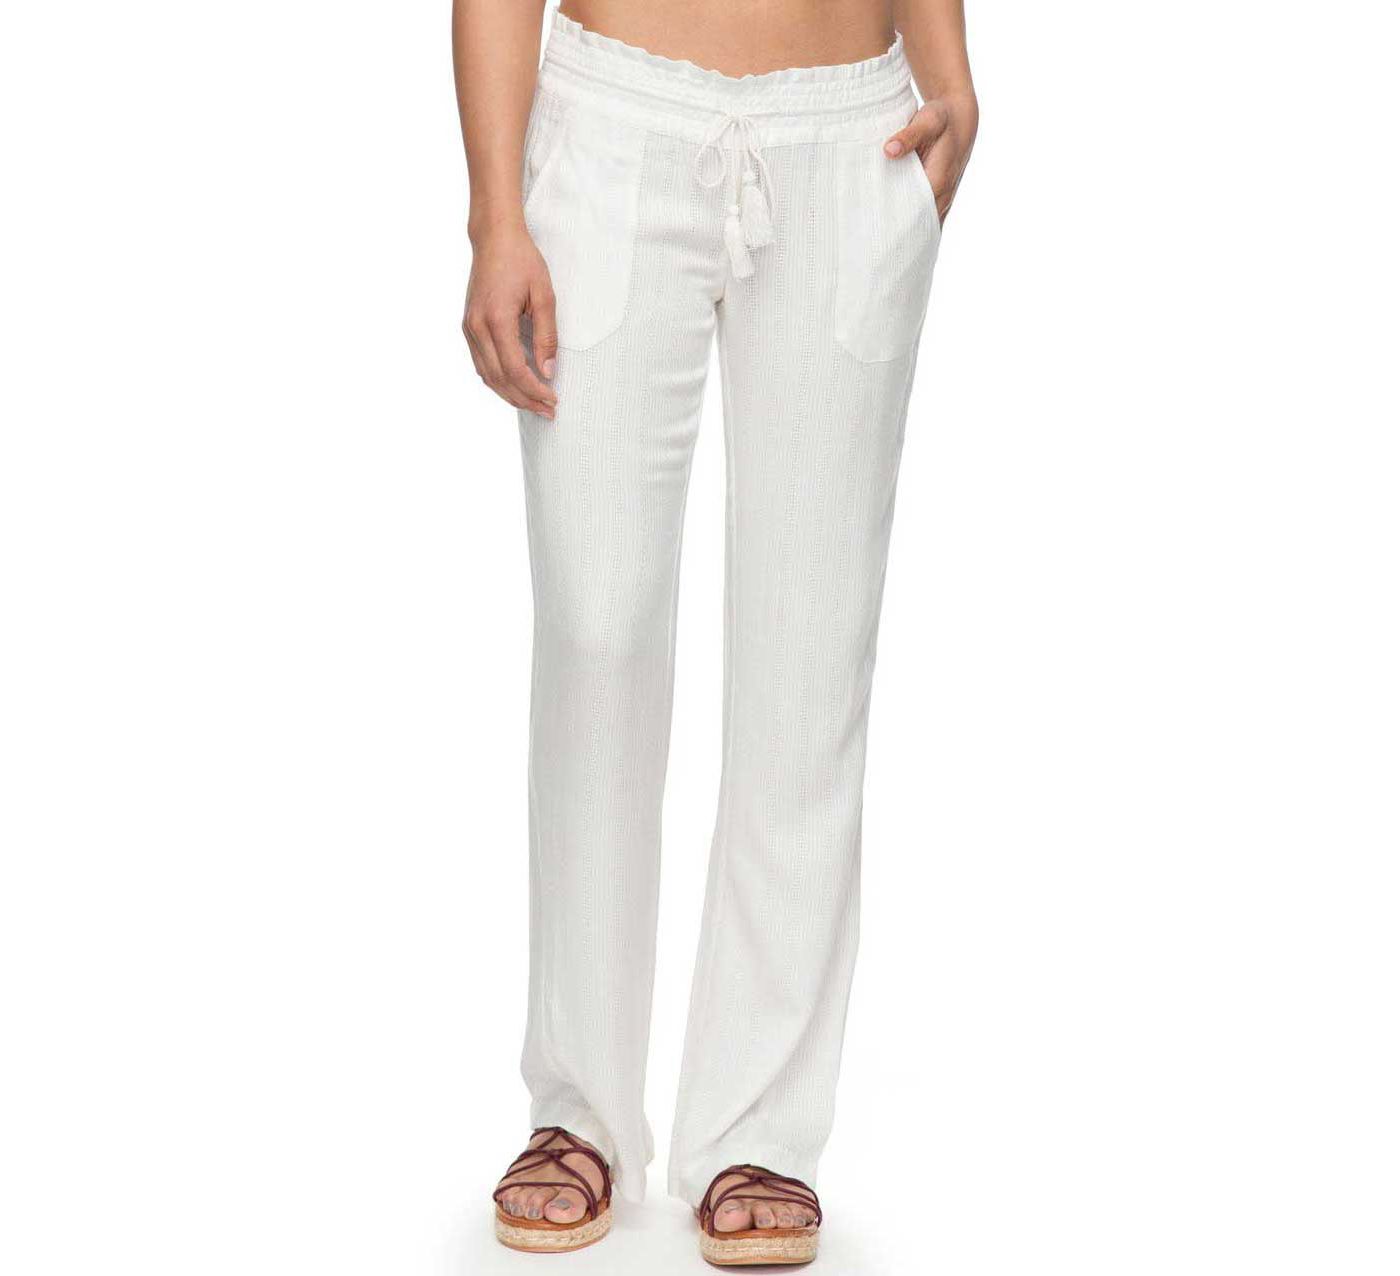 Roxy Women's Oceanside Vicose Pant | DICK'S Sporting Goods